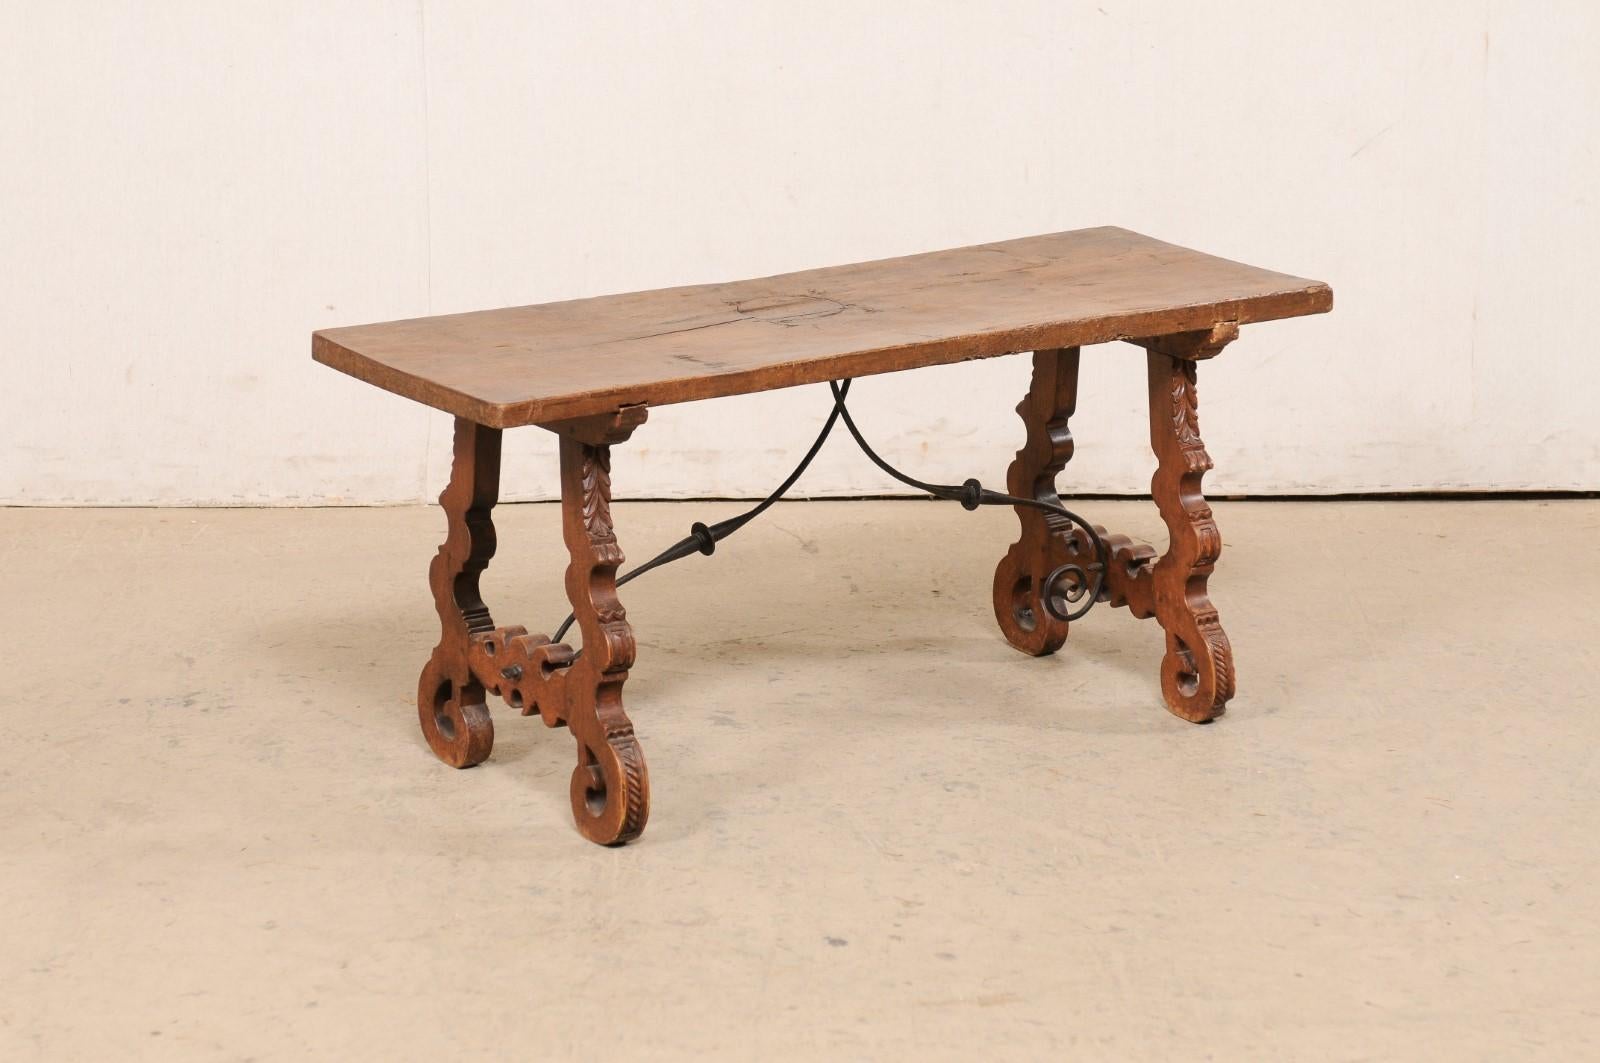 A Spanish wooden coffee table, with lyre legs and iron stretcher, from the turn of the 19th and 20th century. This antique table from Spain features a single-board rectangular-shaped top, which is raised upon a pair of sinuously carved lyre-legs